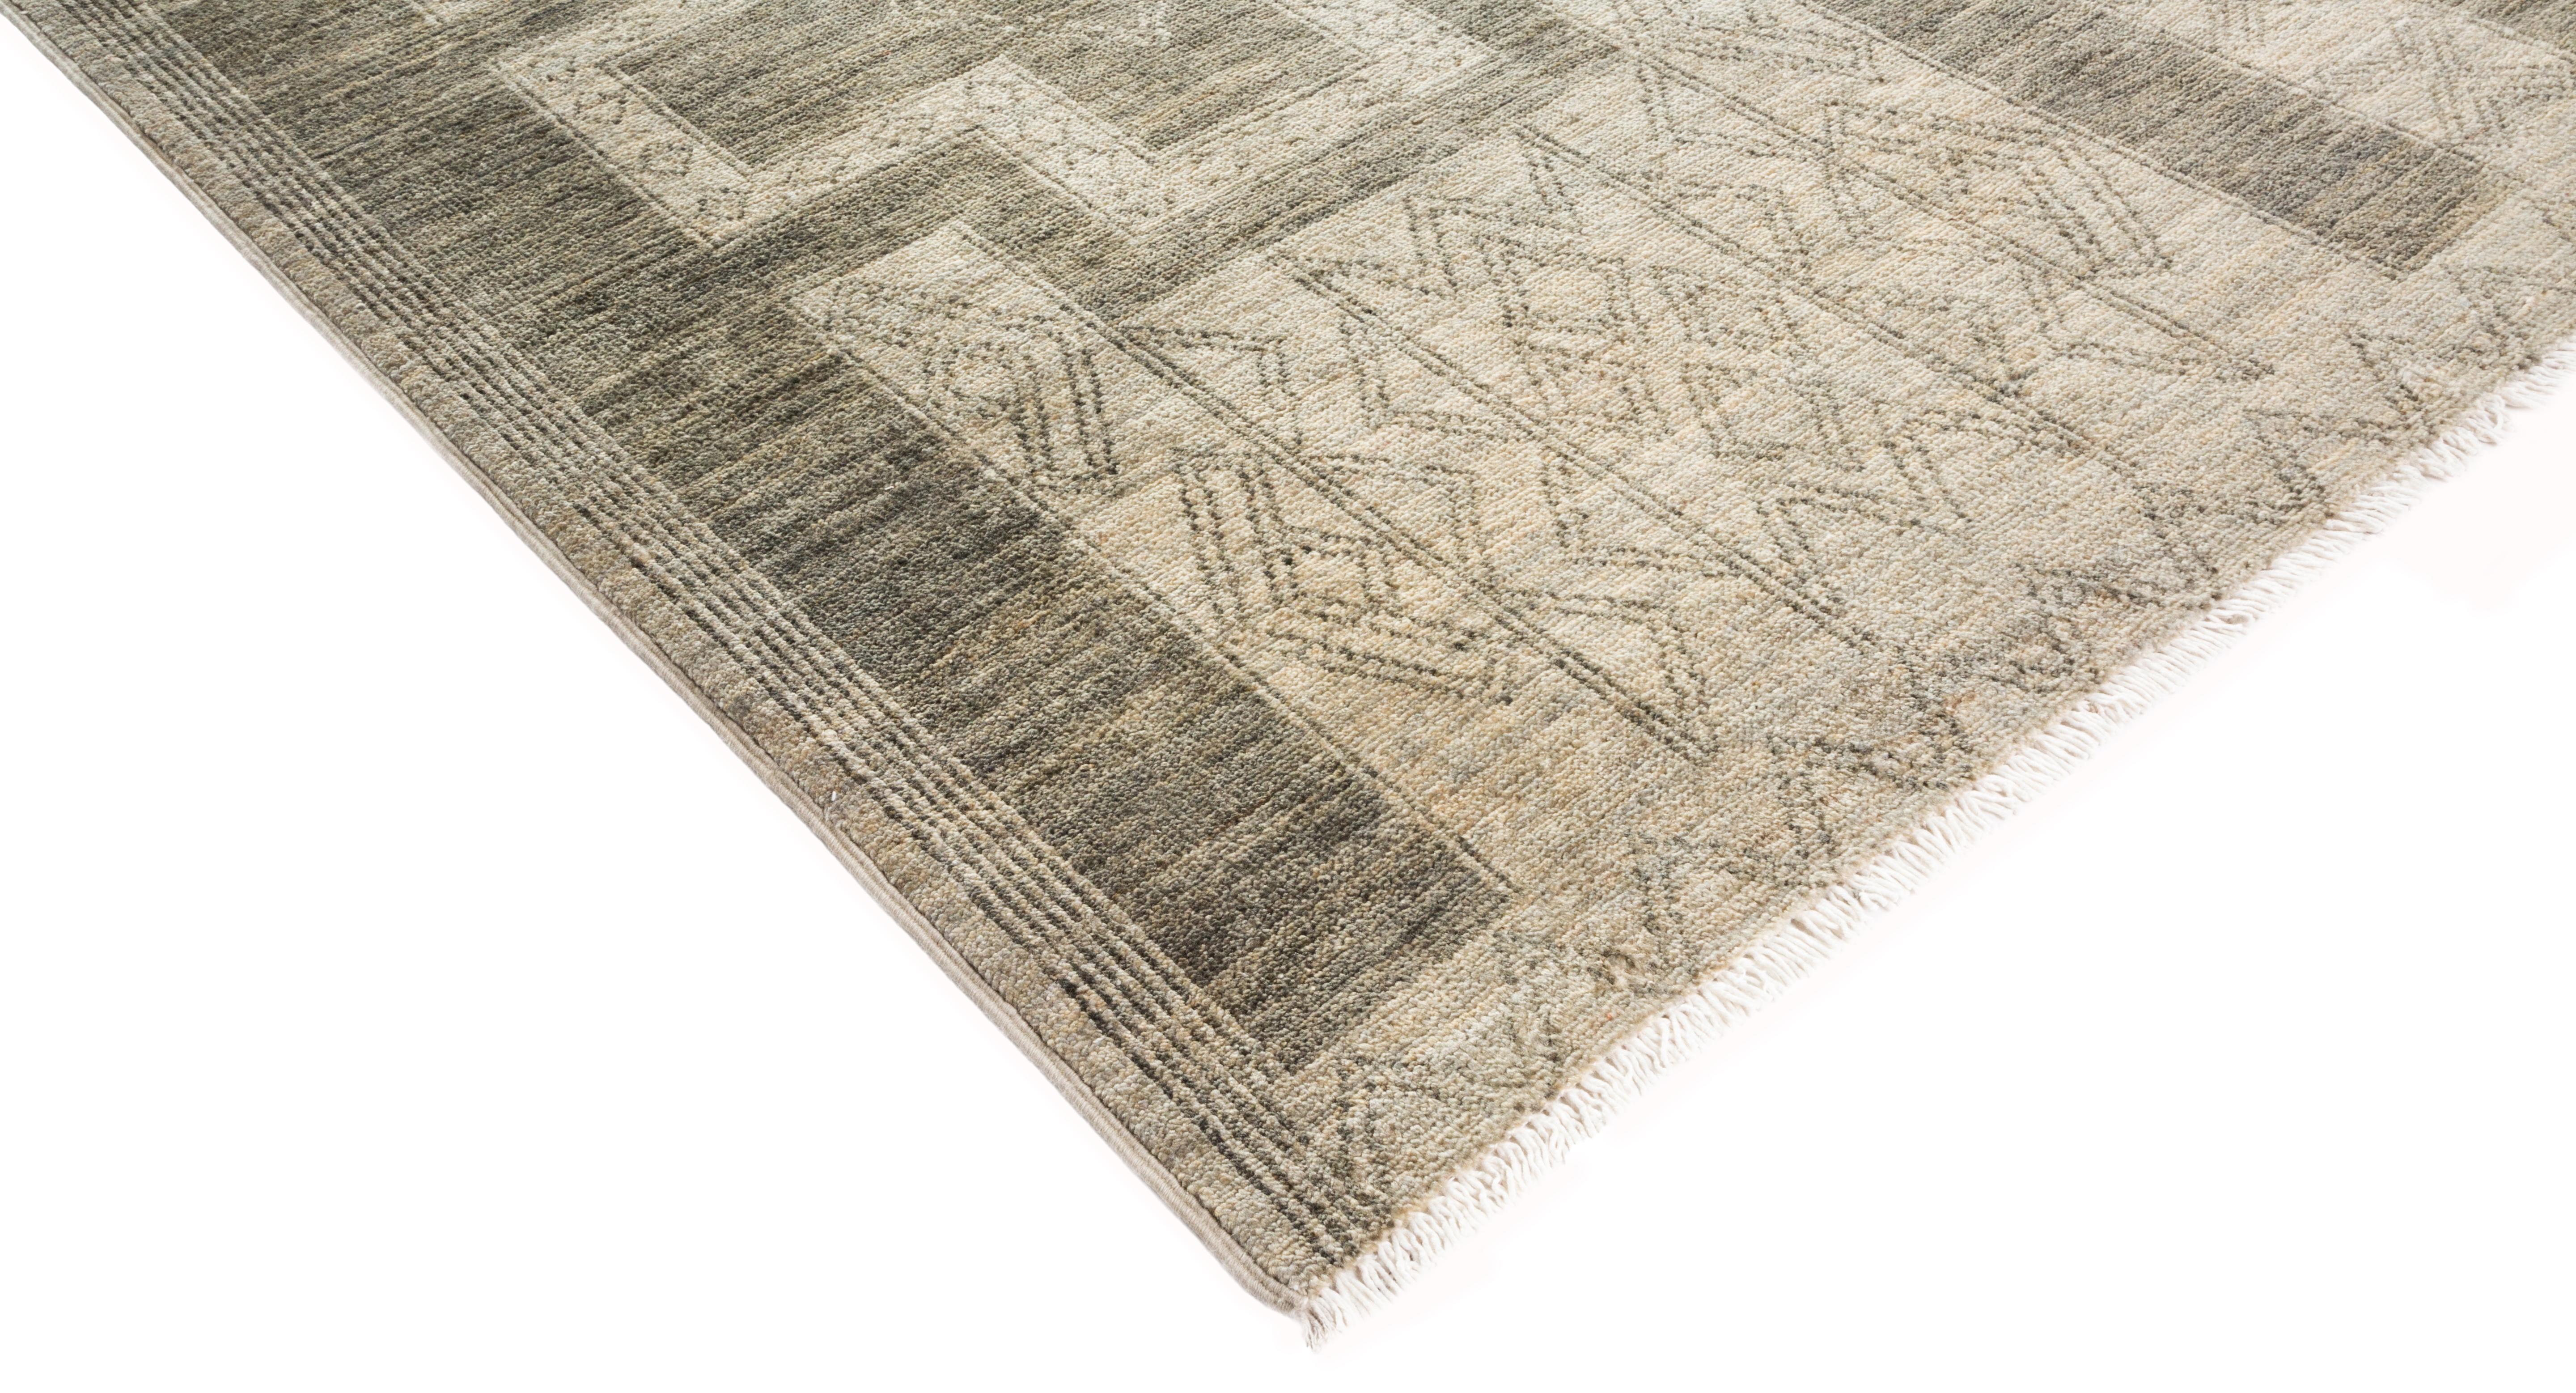 Color: Beige - Made in: Pakistan. 100% wool. The rich textile tradition of western Africa inspired the Tribal collection of hand knotted rugs. Incorporating a medley of geometric motifs, in palettes ranging from earthy to vivacious, these rugs bring